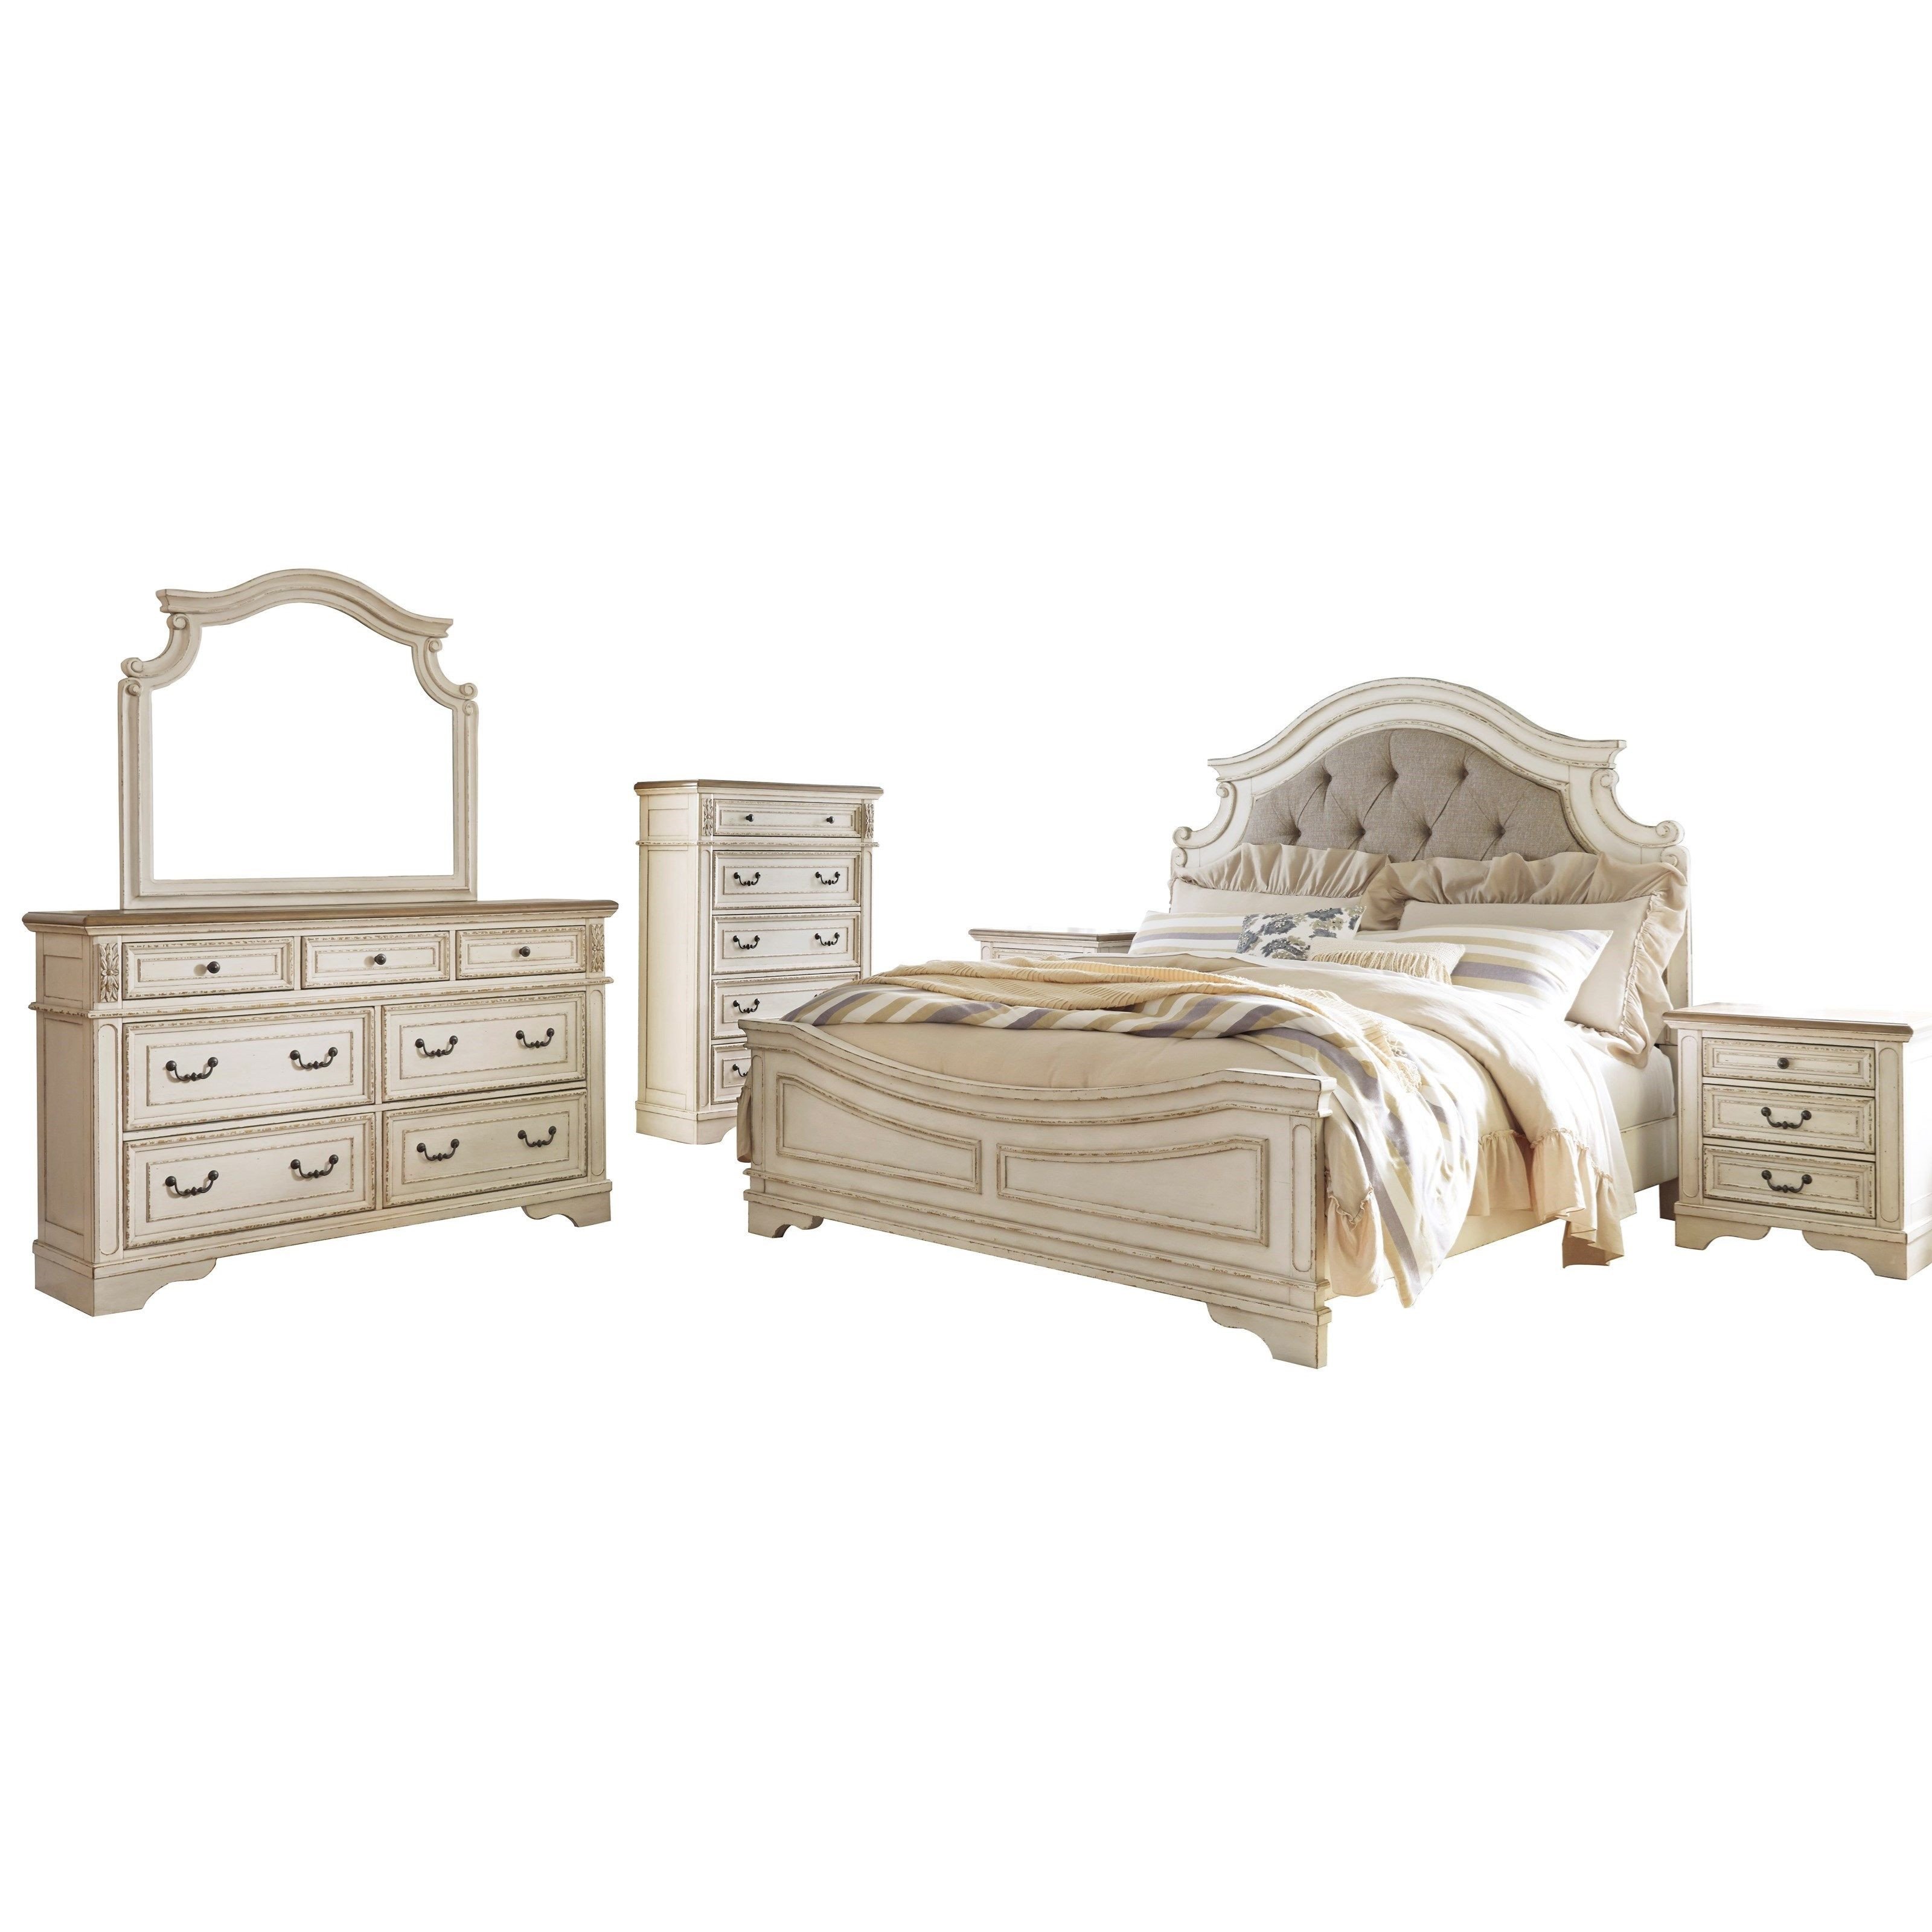 Ashley Queen Bedroom Set Elegant Realyn Queen Bedroom Group by Signature Design by ashley In